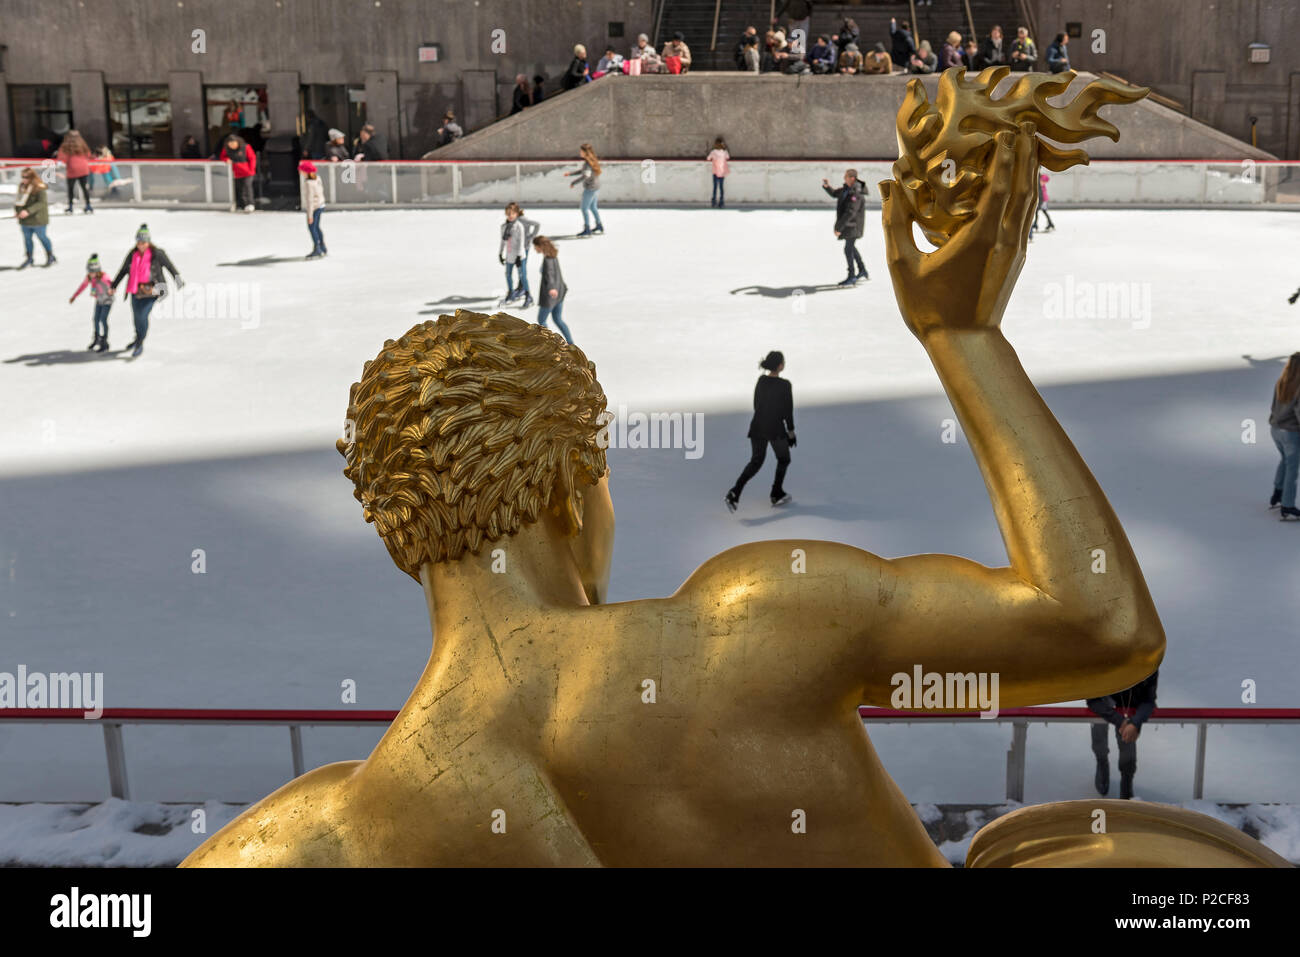 Prometheus sculpture by Paul Manship and ice rink at Rockefeller Center in Manhattan, New York City, USA Stock Photo